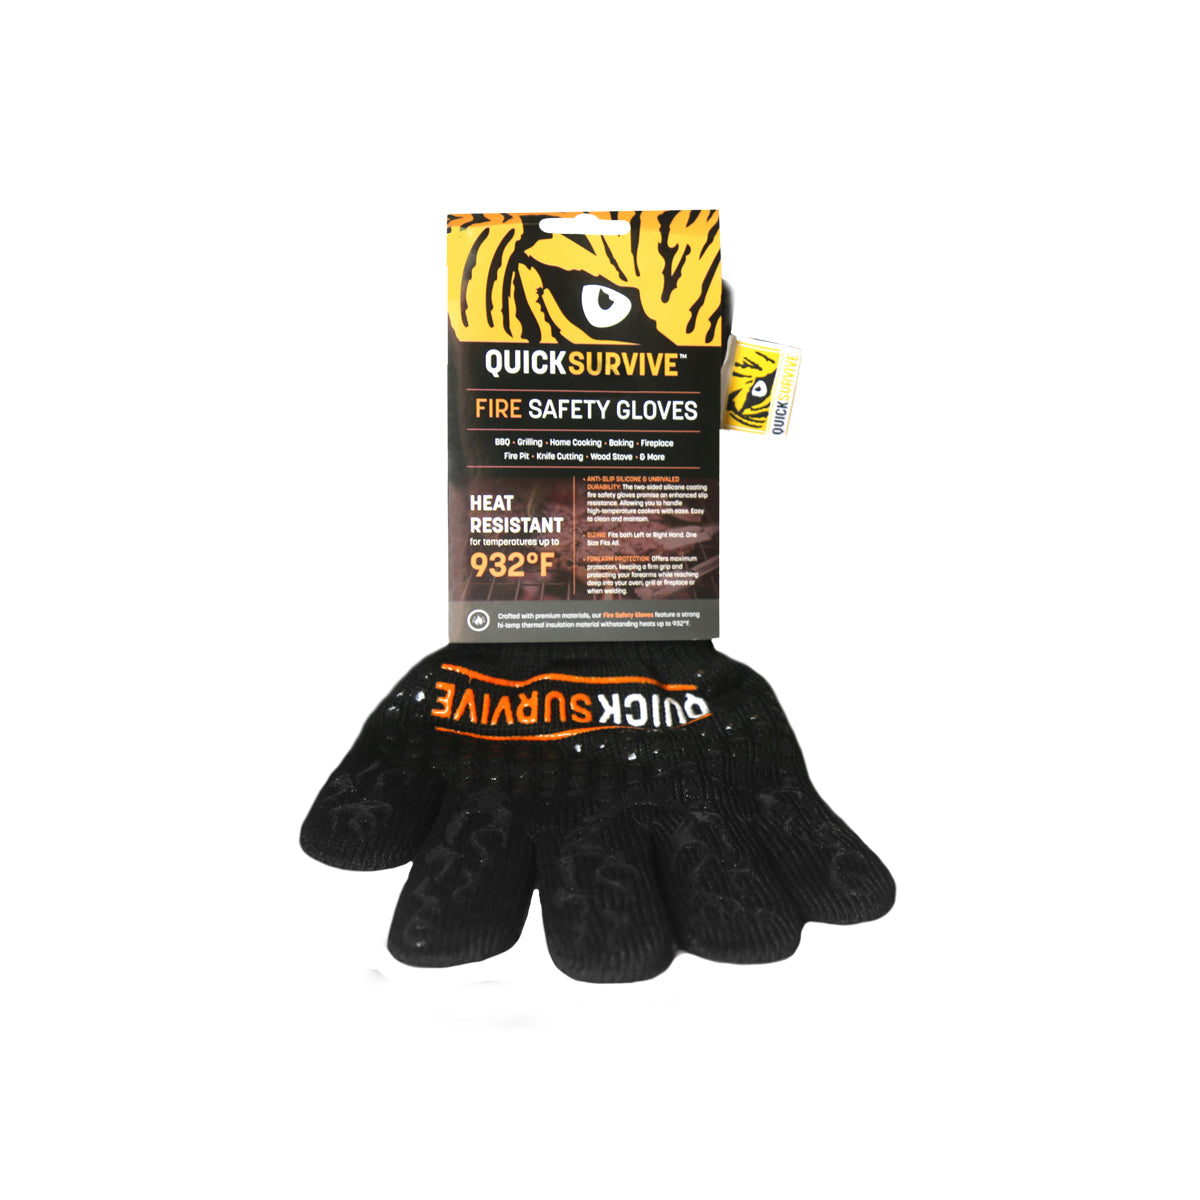 Heat Resistant Fire Safety Glove by Quick Survive